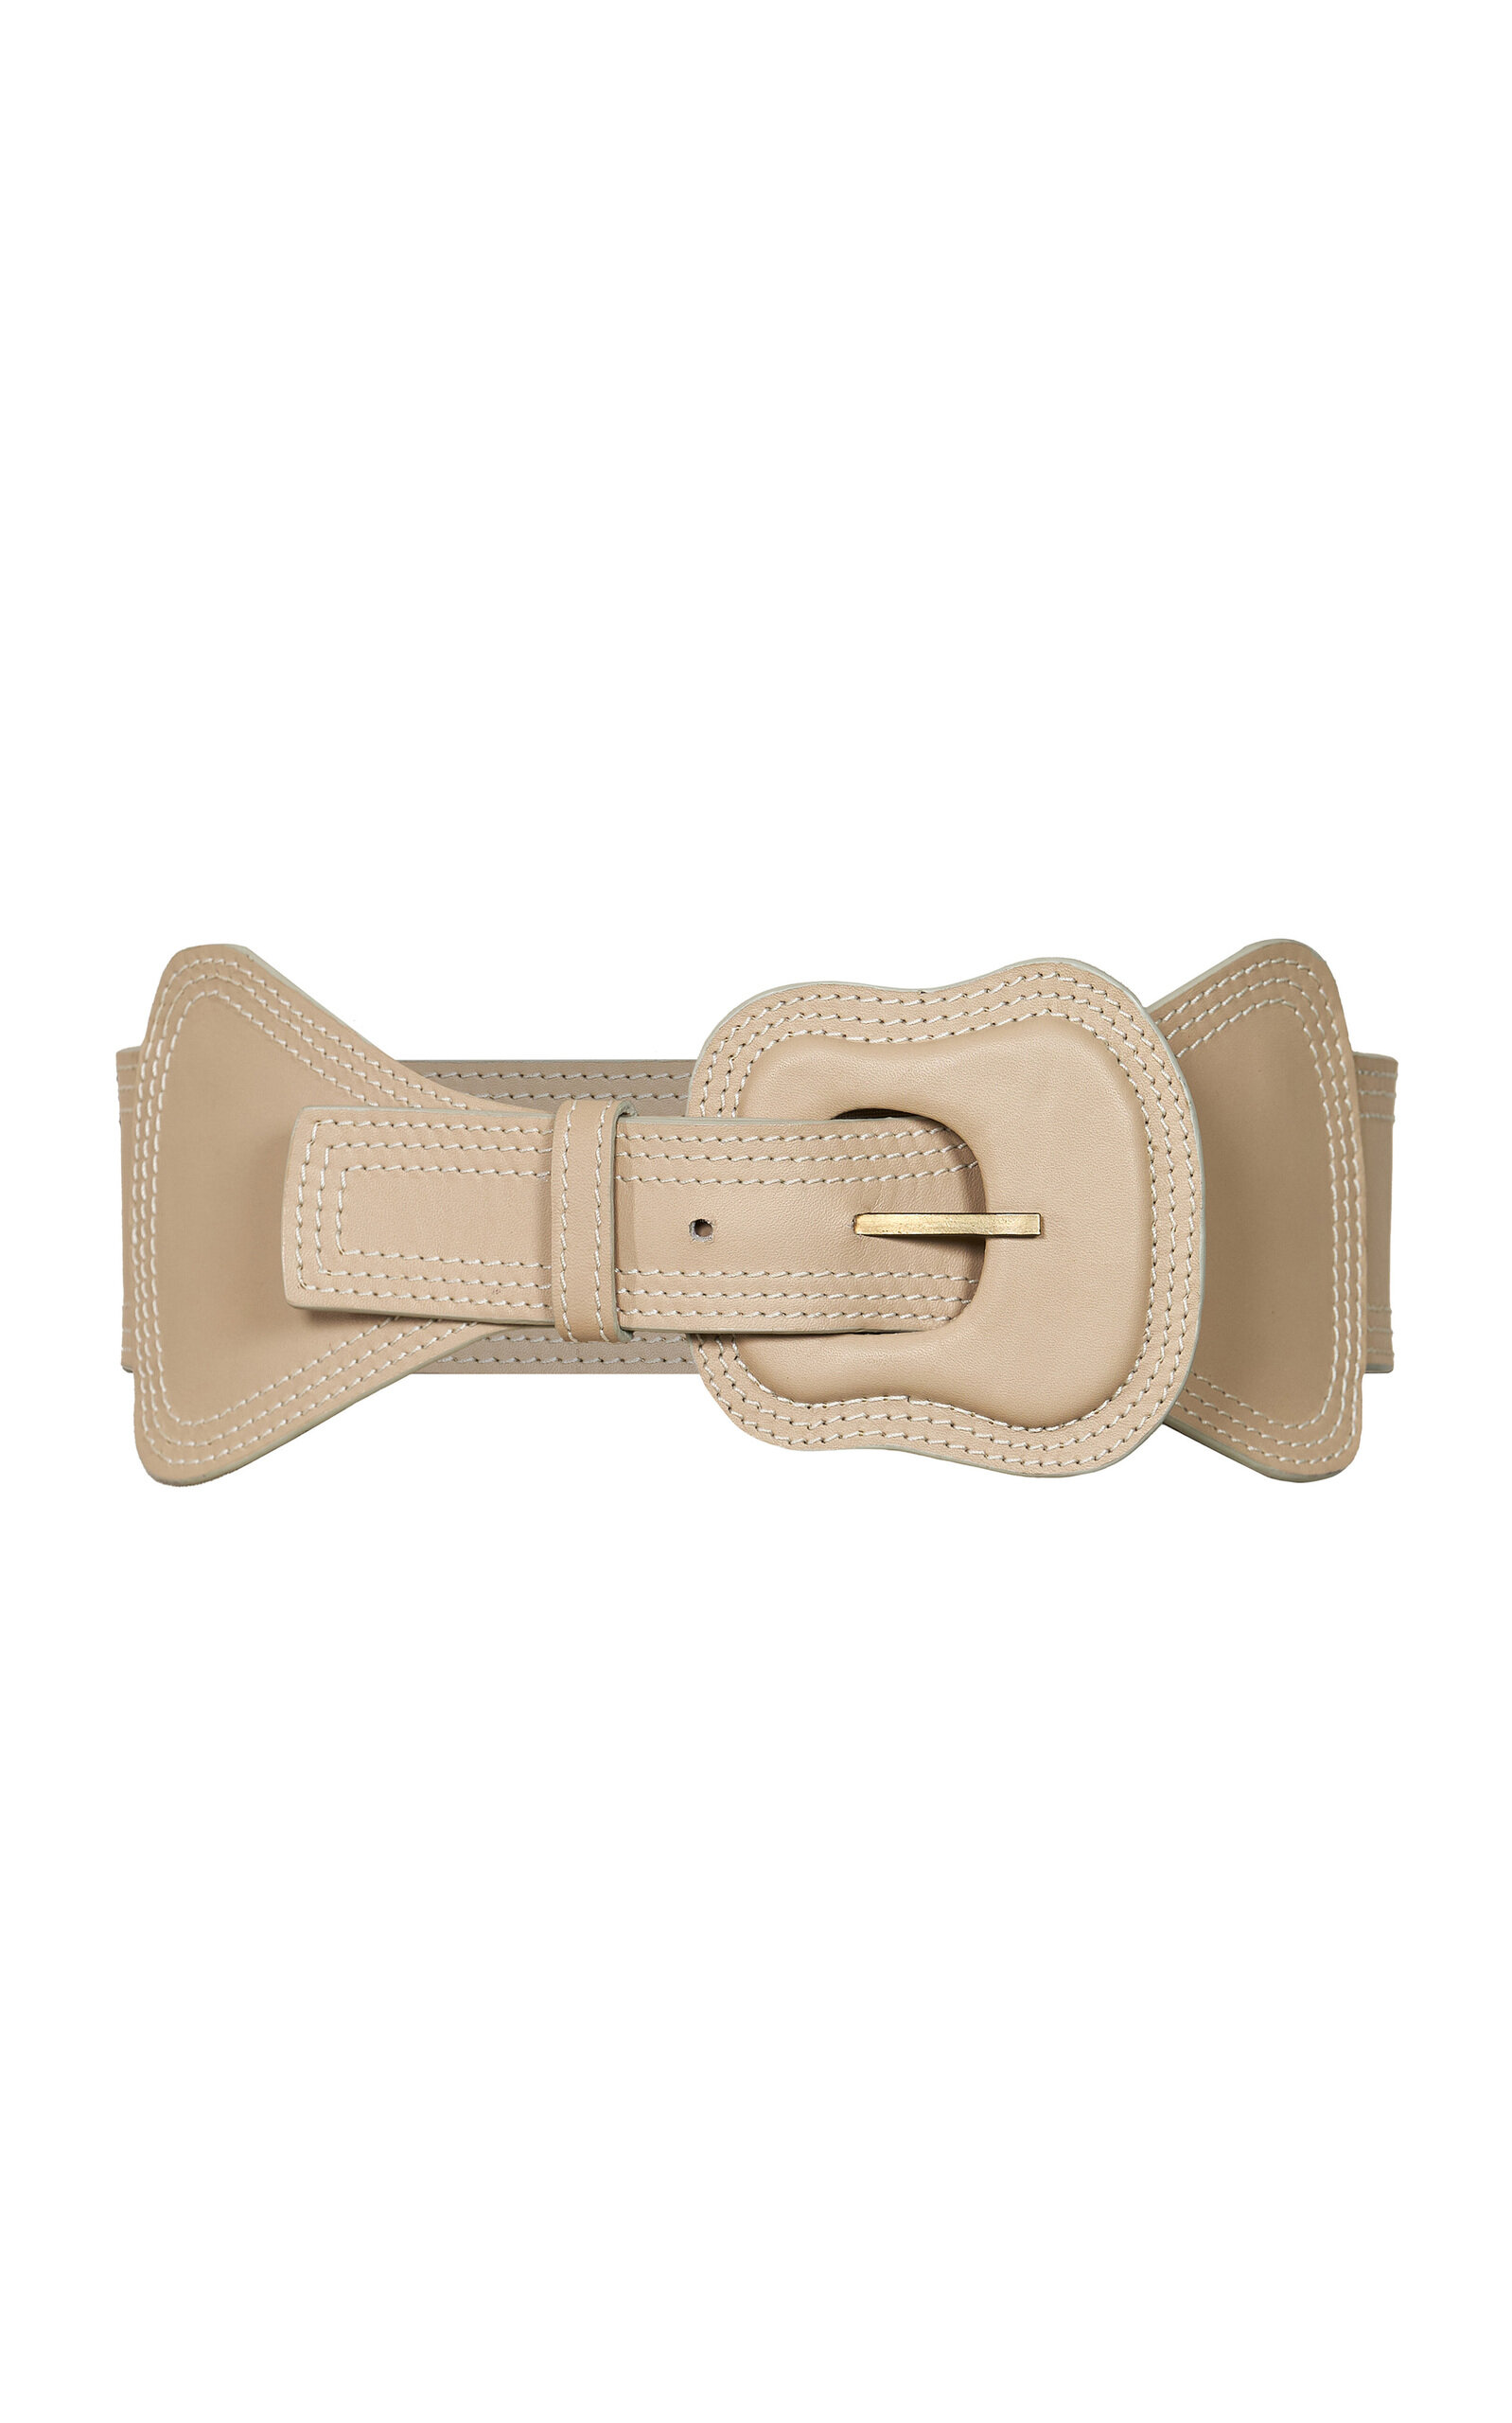 Johanna Ortiz Southern Tirbutary Leather Belt In White